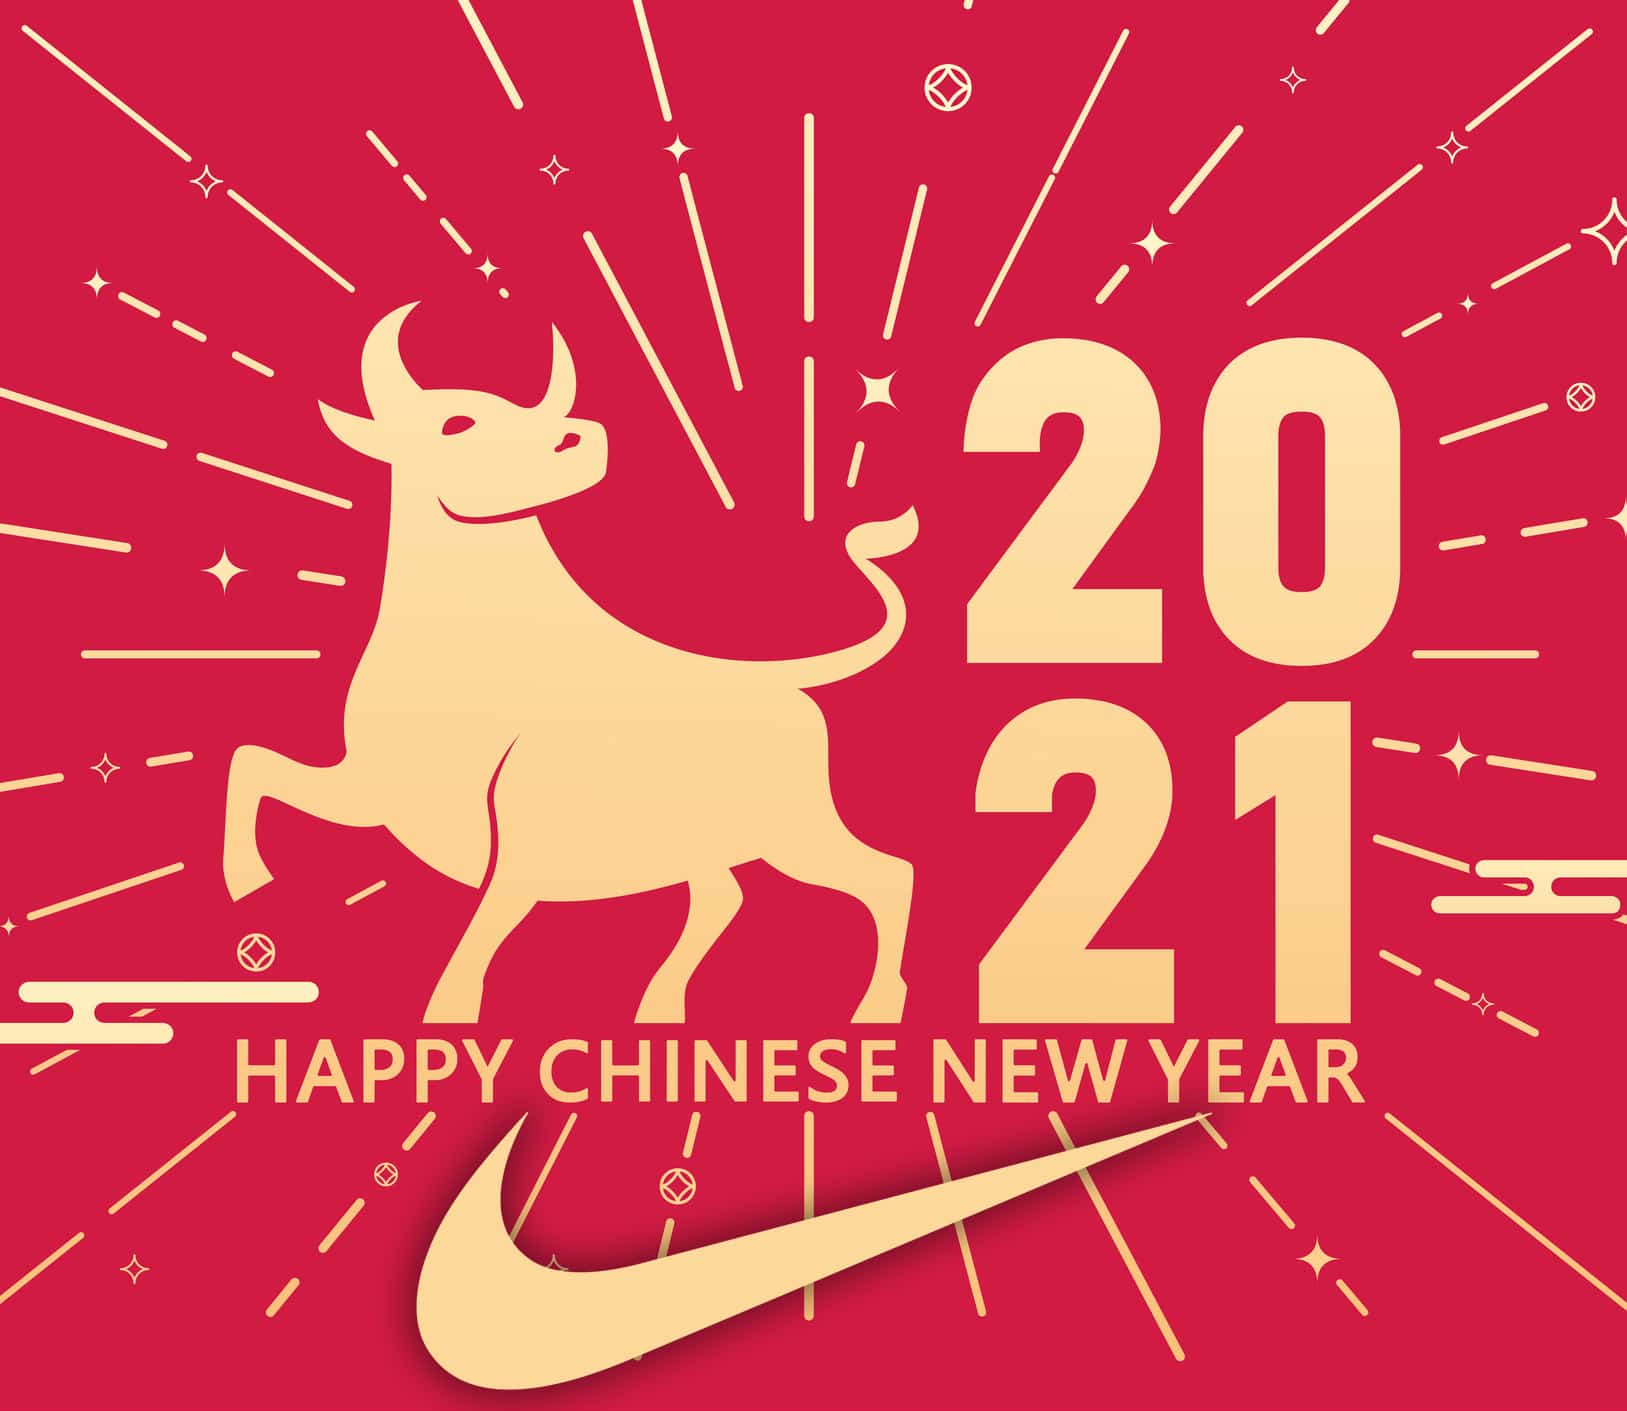 Nike Chinese New Year Pack -The 2021 Chinese New Year Line from Nike